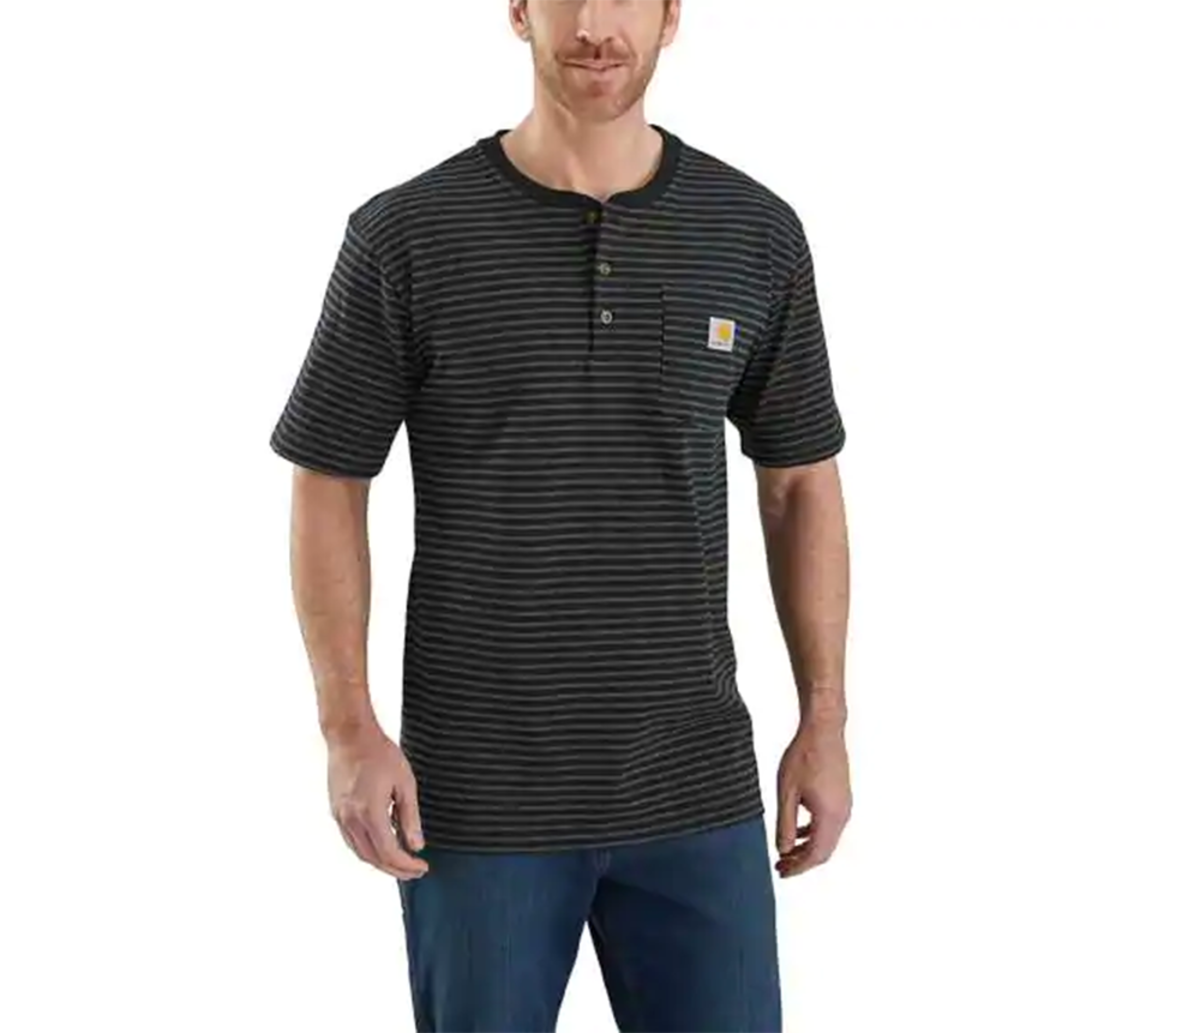 Carhartt Is Having a Sale on T-Shirts, Pants, Sweaters and More - Men's ...